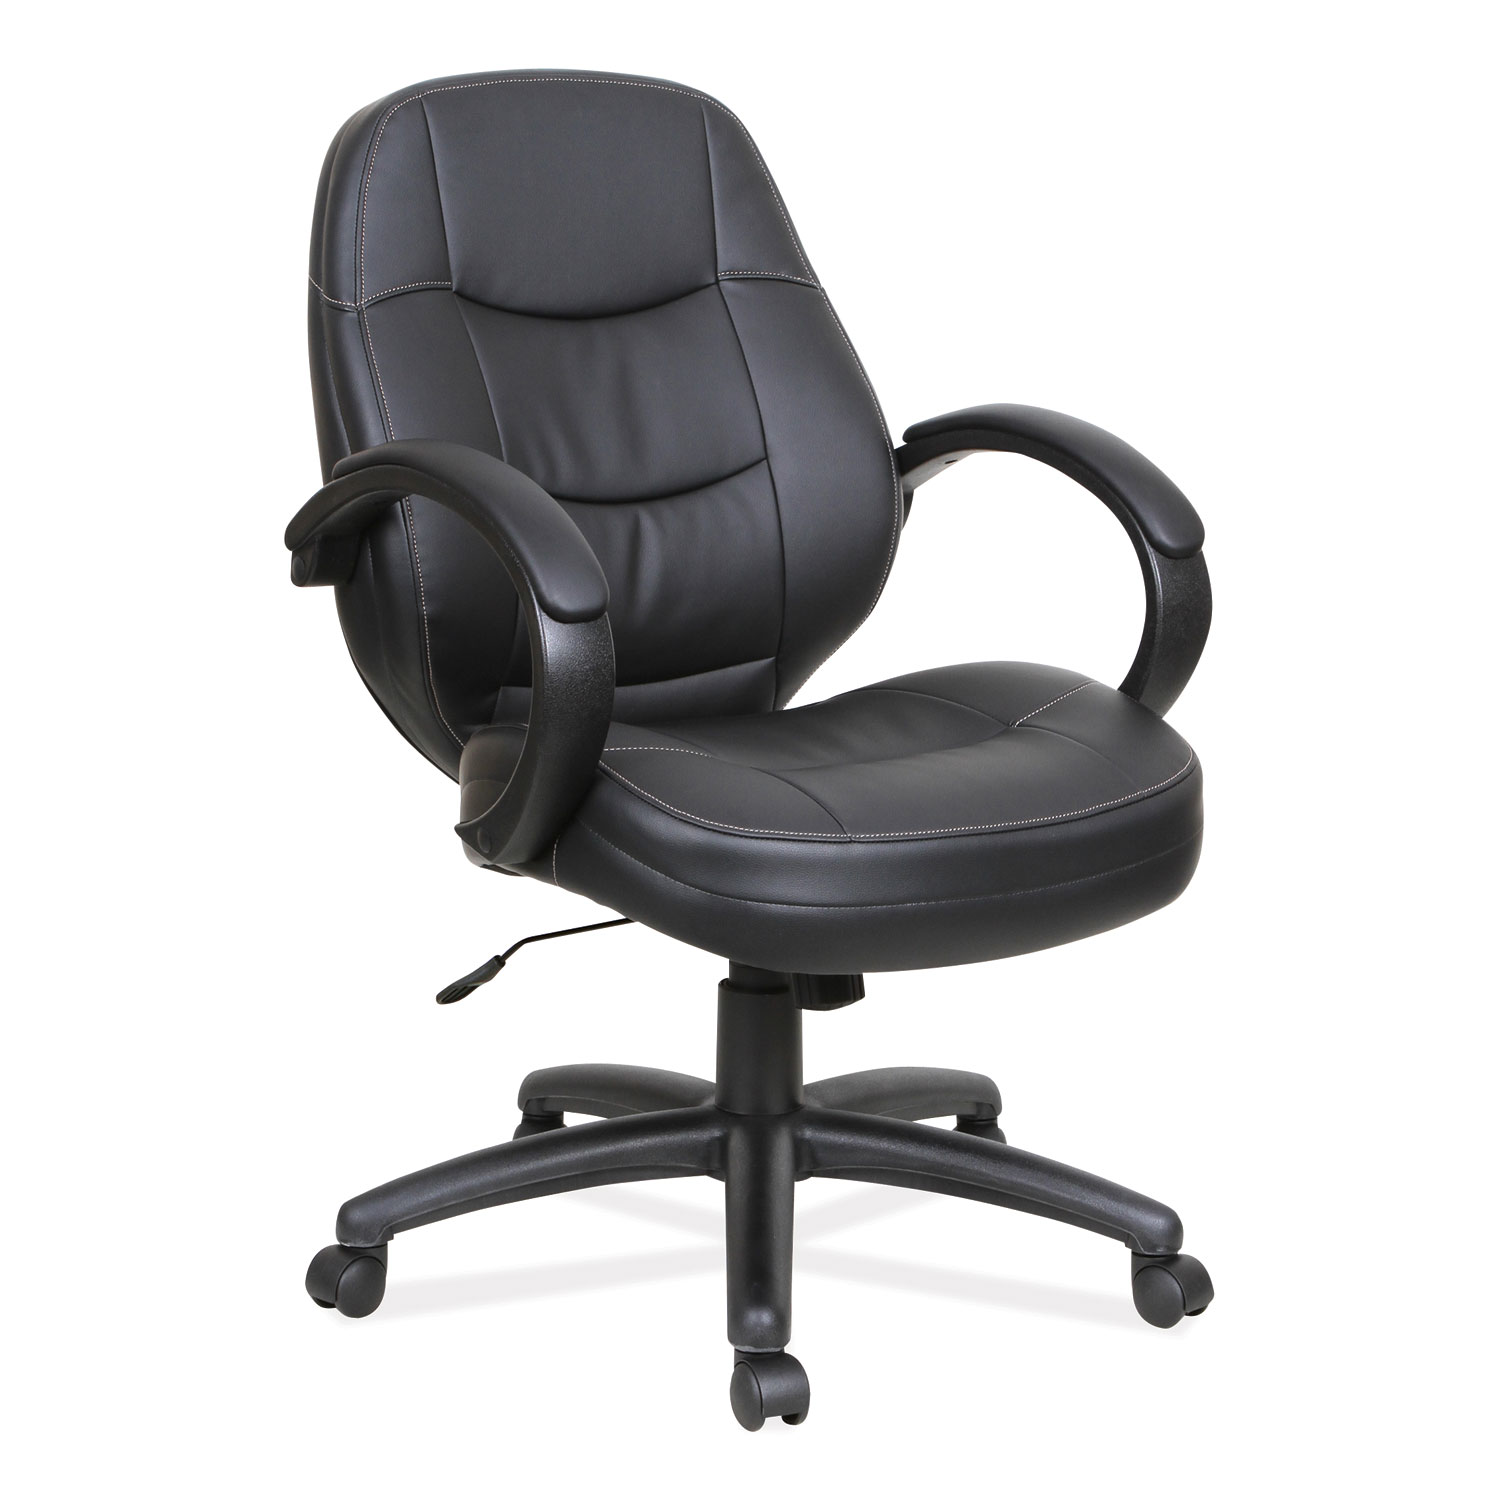  Alera ALEPF4219 Alera PF Series Mid-Back Leather Office Chair, Supports up to 275 lbs., Black Seat/Black Back, Black Base (ALEPF4219) 